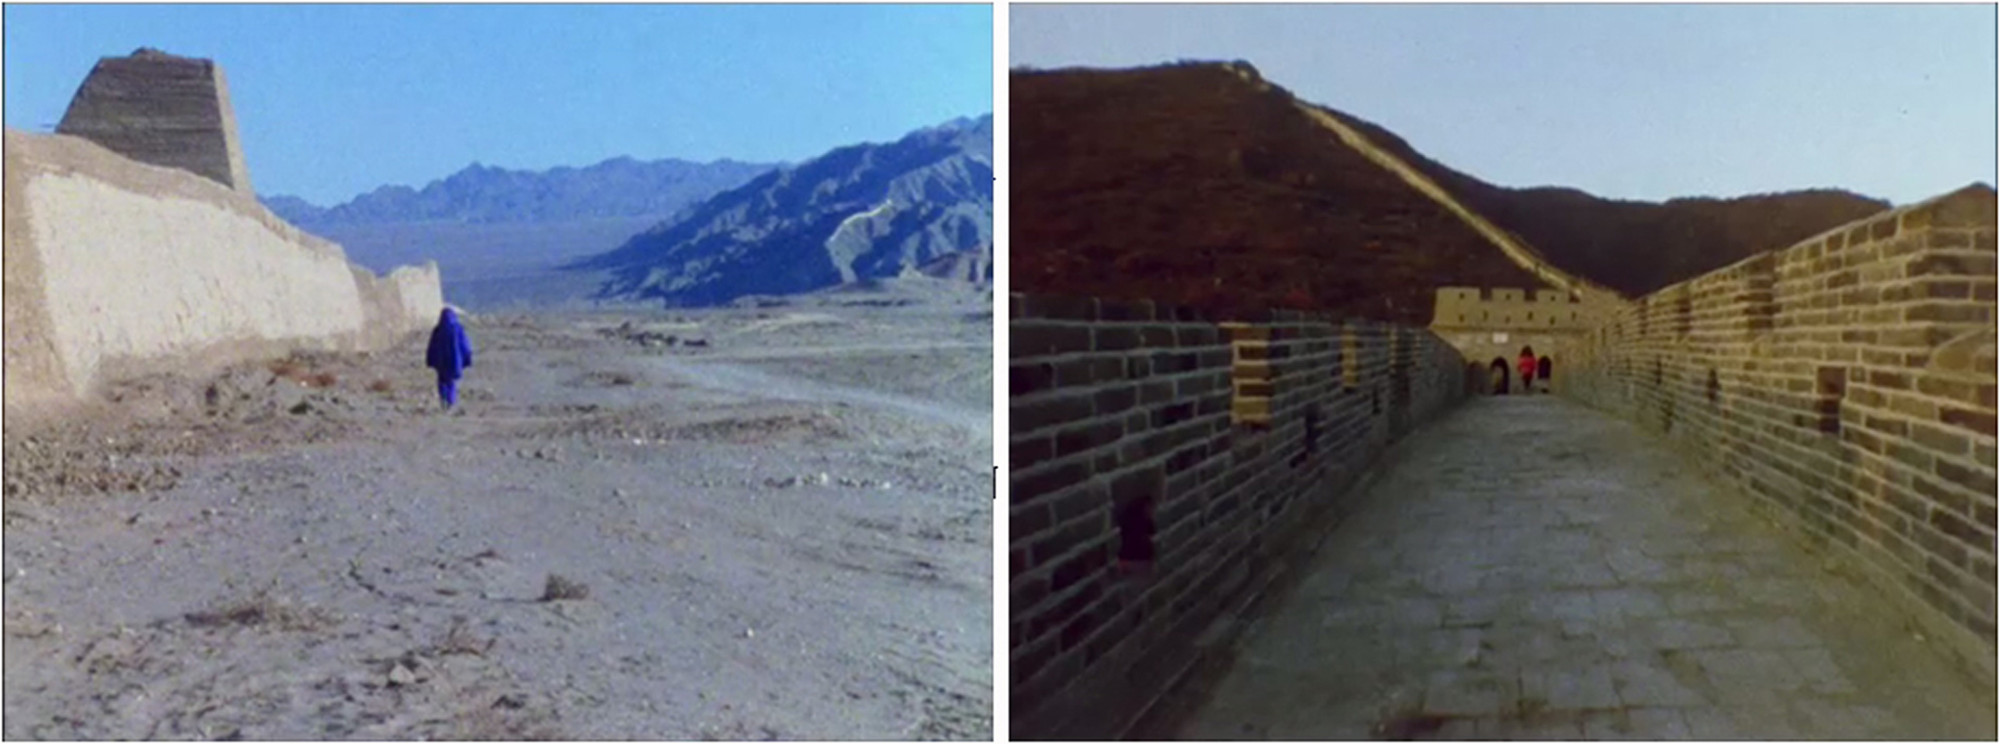 Marina Abramović and Ulay. _The Great Wall Walk._ 1988/2010. Originally performed for 90 days along The Great Wall of China. 16mm film (color, silent) transferred to two-channel video. 16:45 min. © 2010 Marina Abramović. Courtesy Marina Abramović and Sean Kelly Gallery/Artists Rights Society (ARS), New York